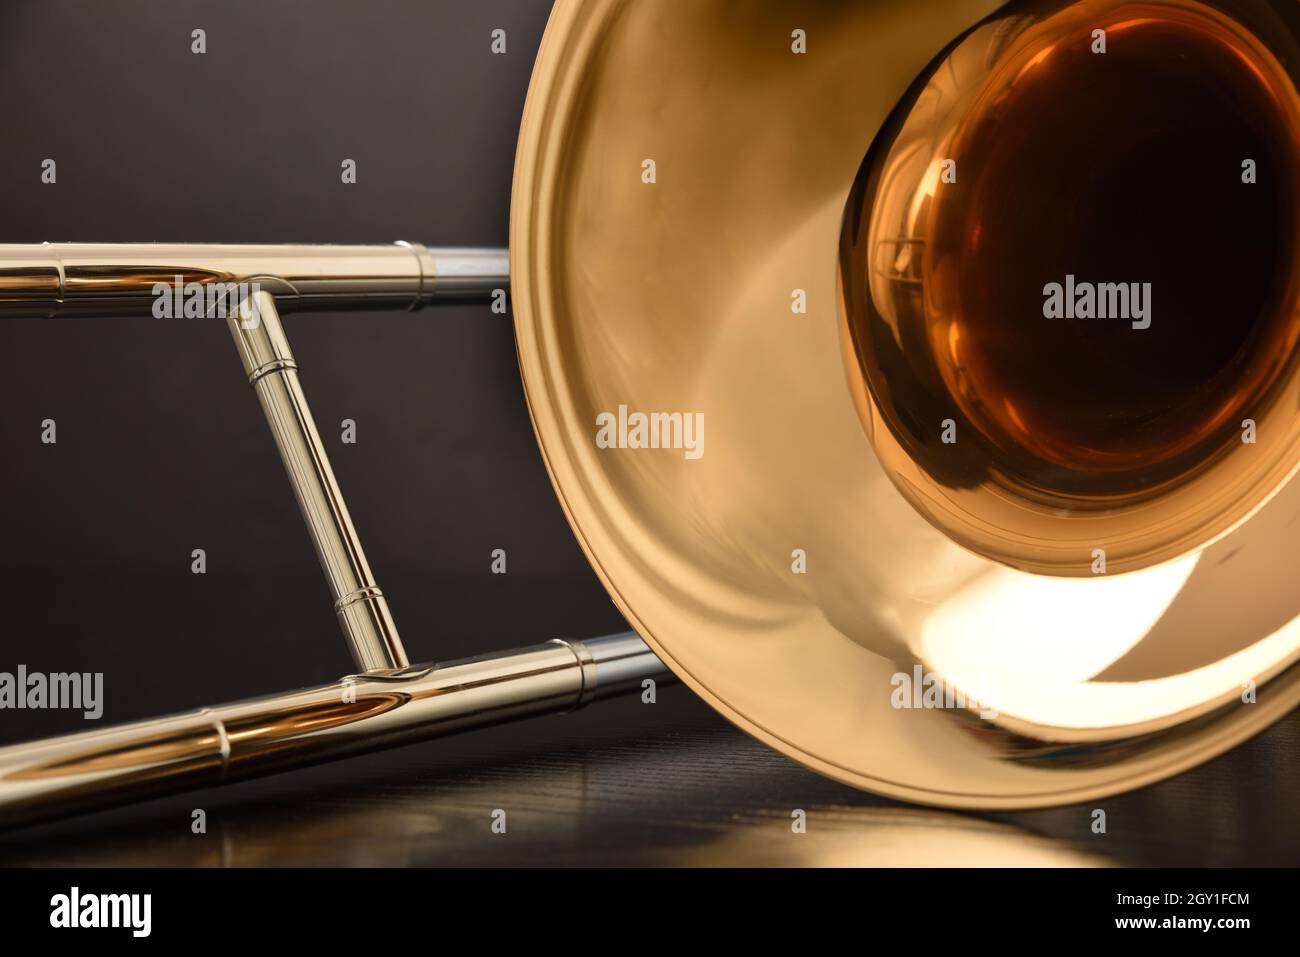 Trombone bell and slide detail on table and black background. Front view. Horizontal composition. Stock Photo